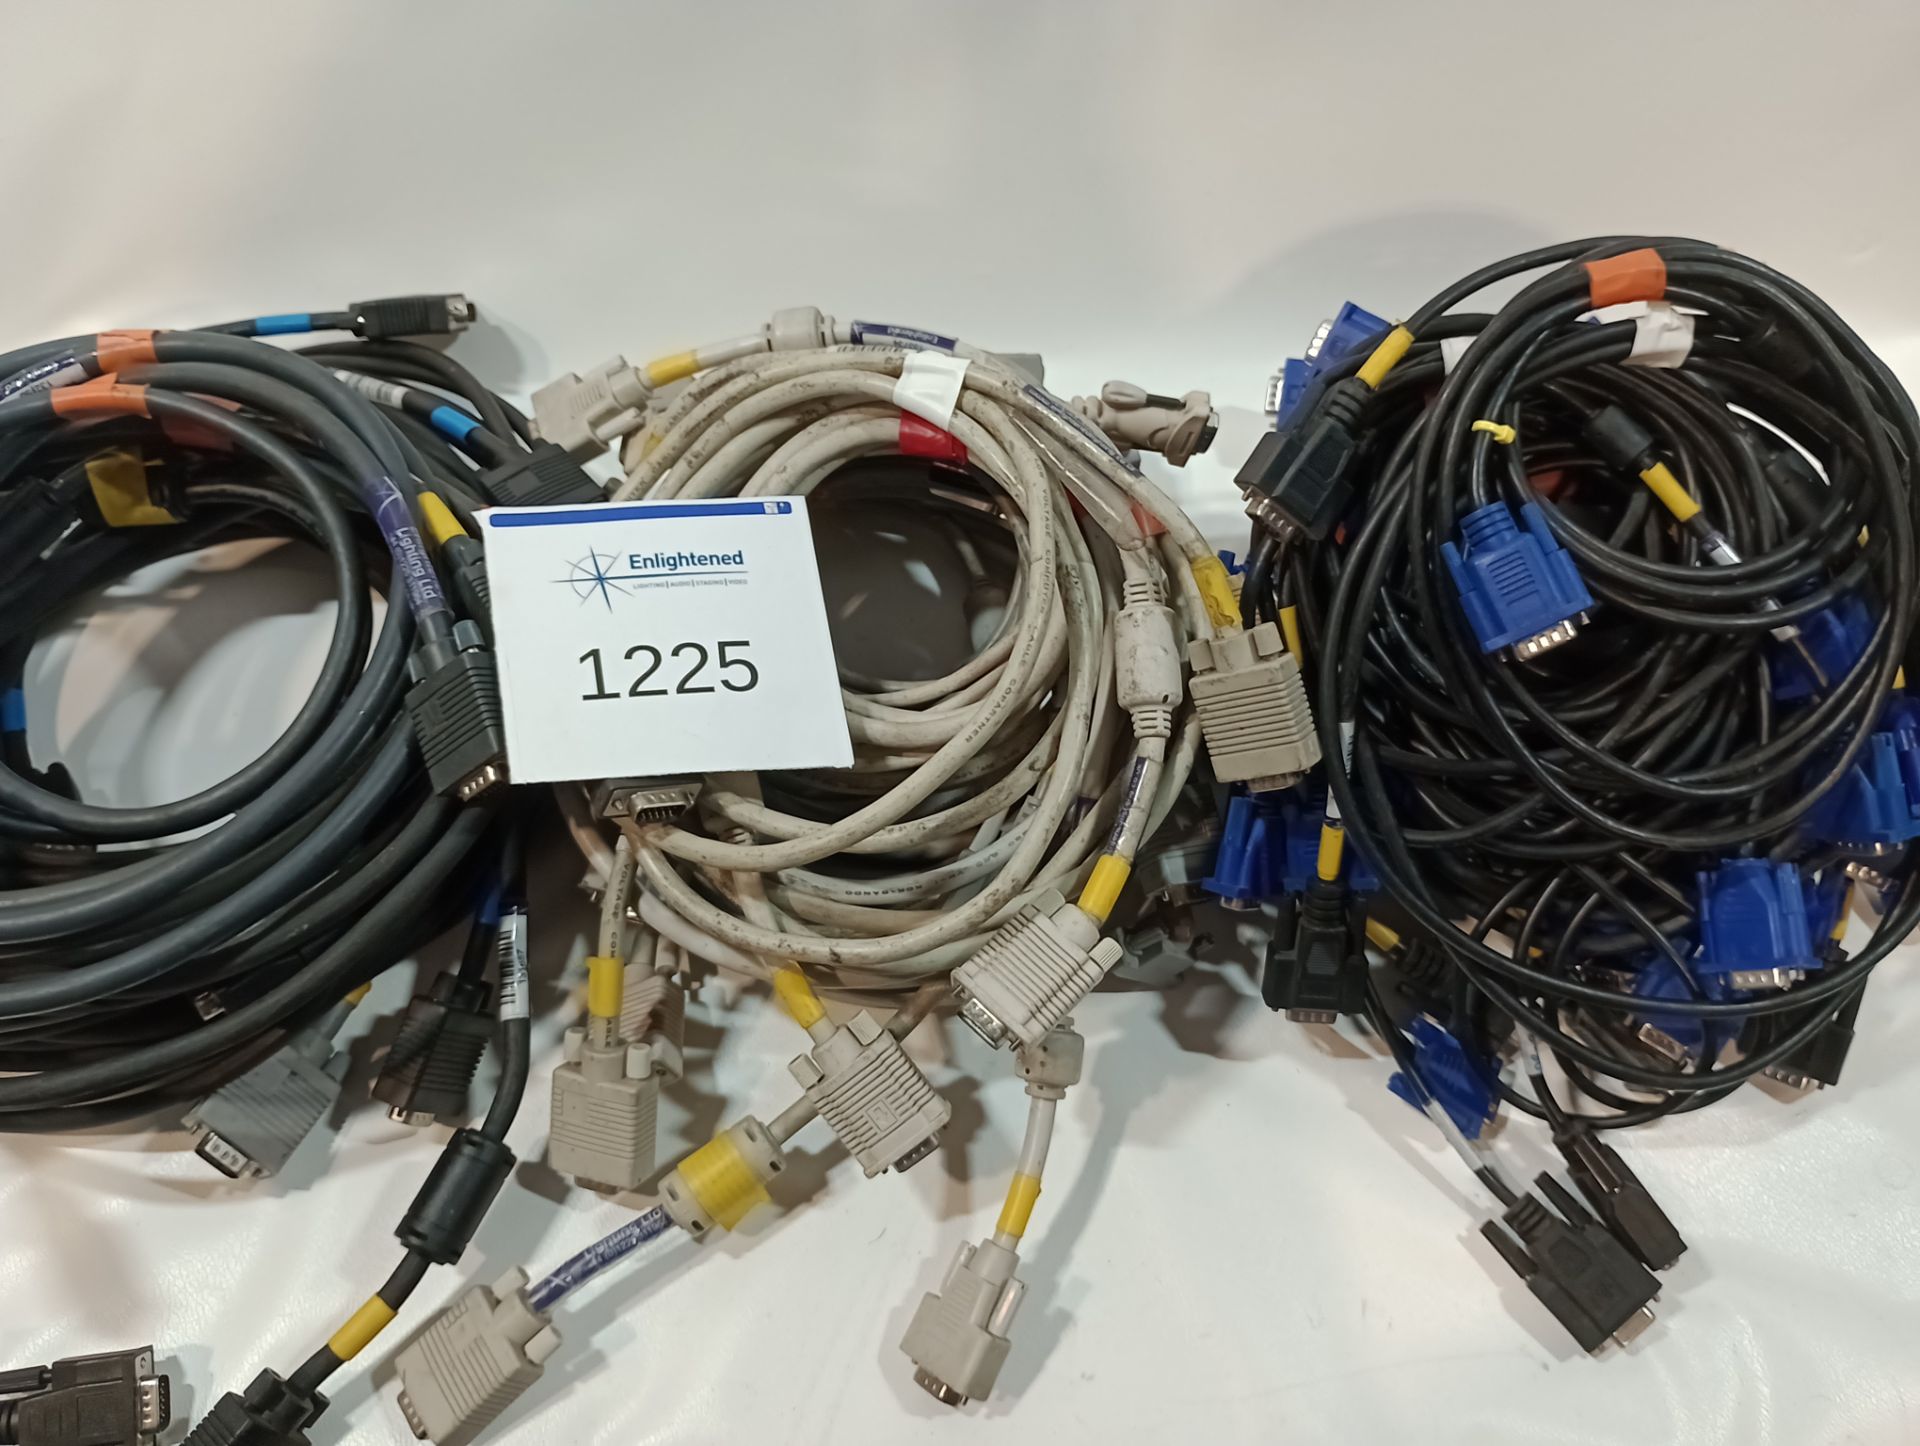 VGA cable 2m and 5m - Image 3 of 3